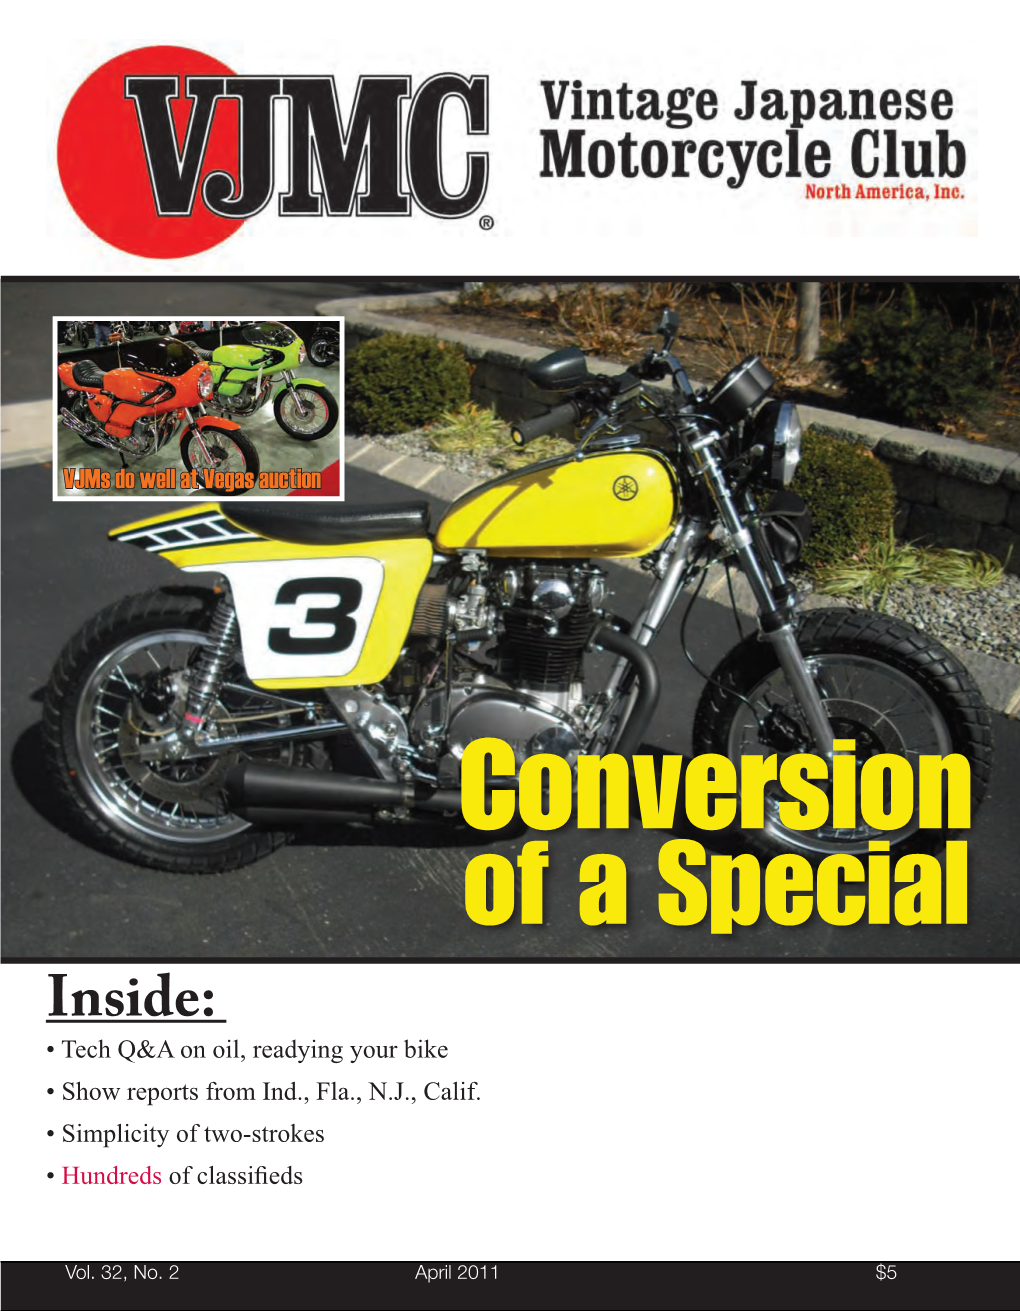 Inside: Tech Q&A on Oil, Readying Your Bike • Show Reports from Ind., Fla., N.J., Calif